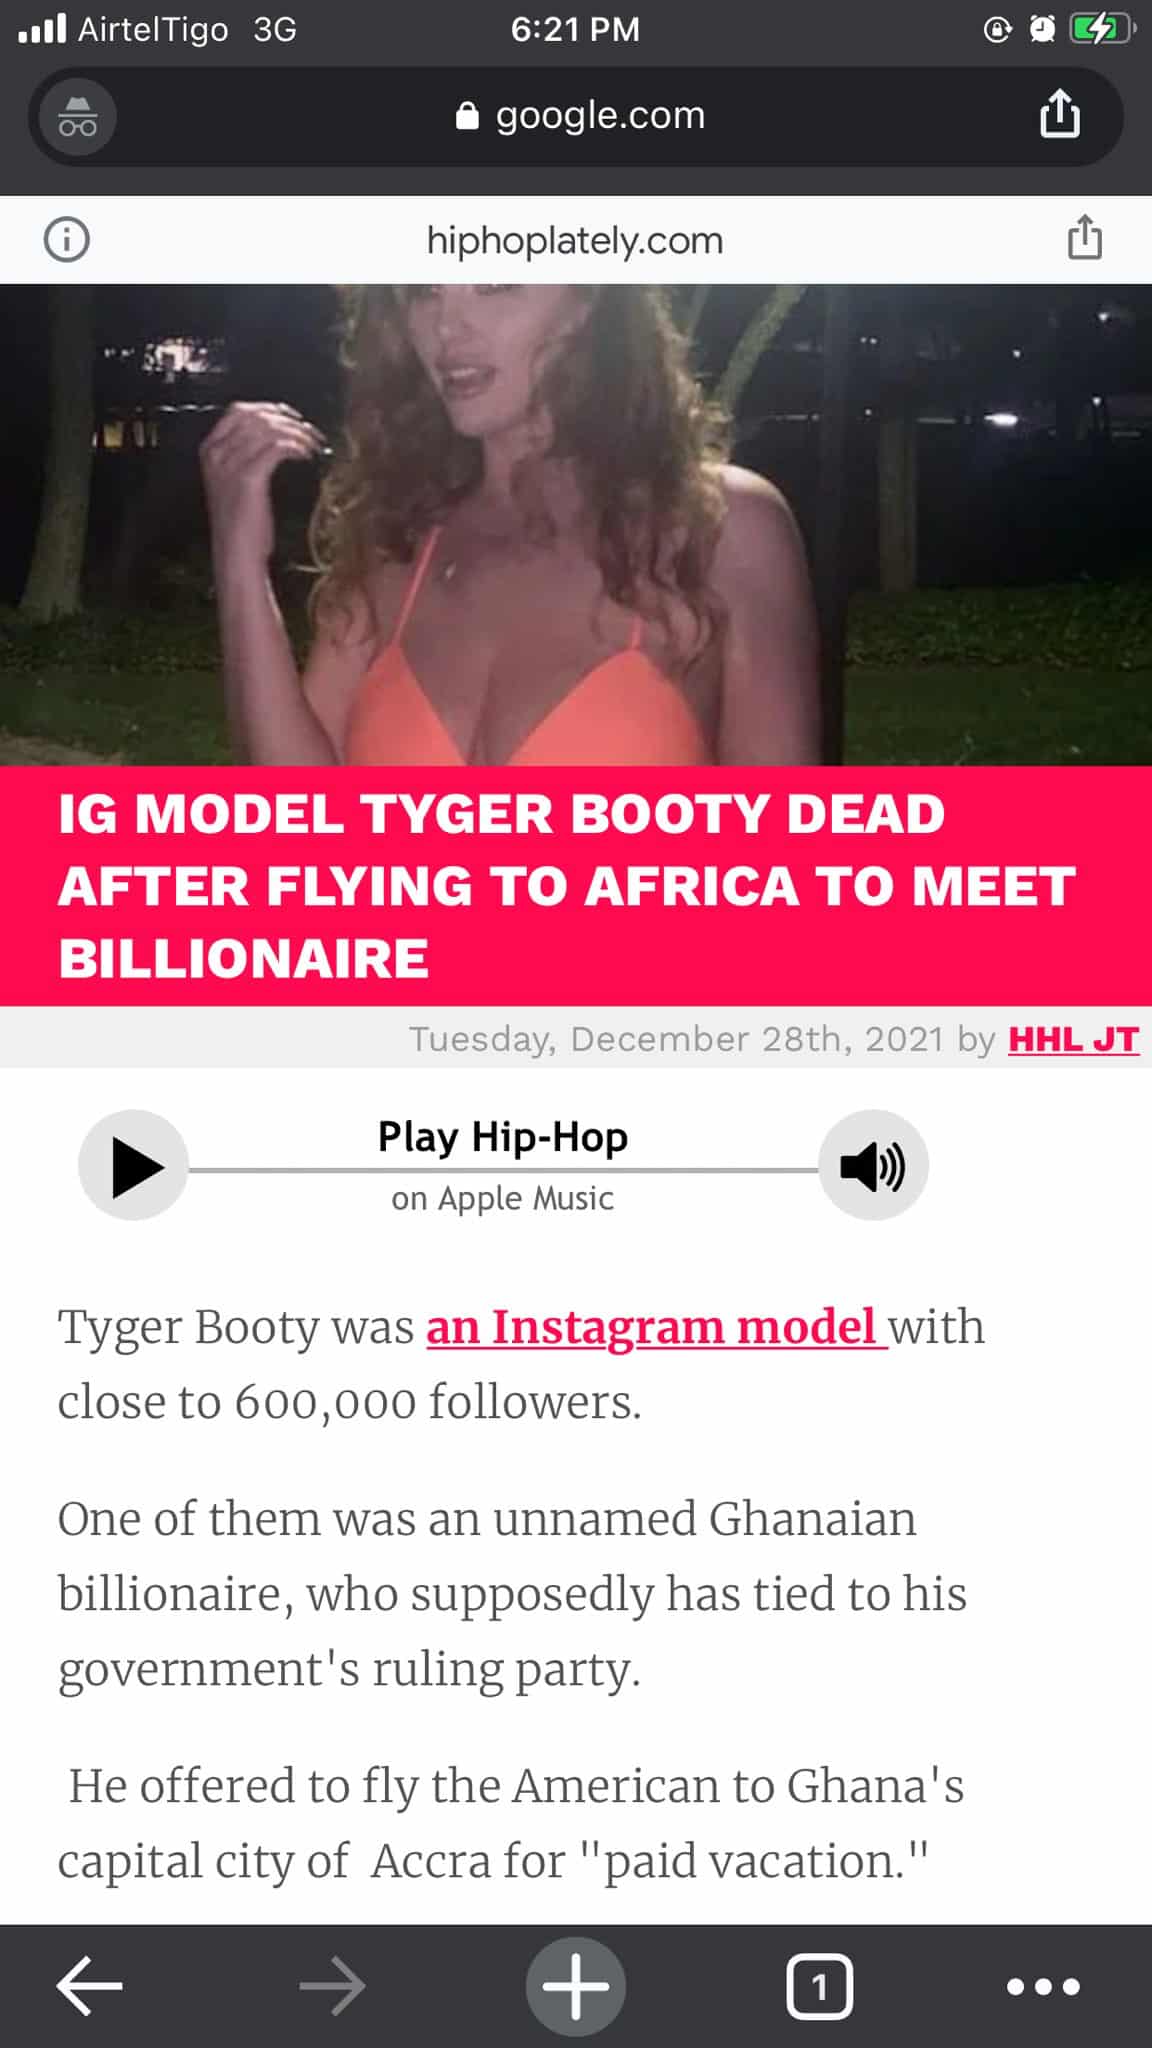 The Ghanaian billionaire who invited the dead American model is linked to the NPP government.